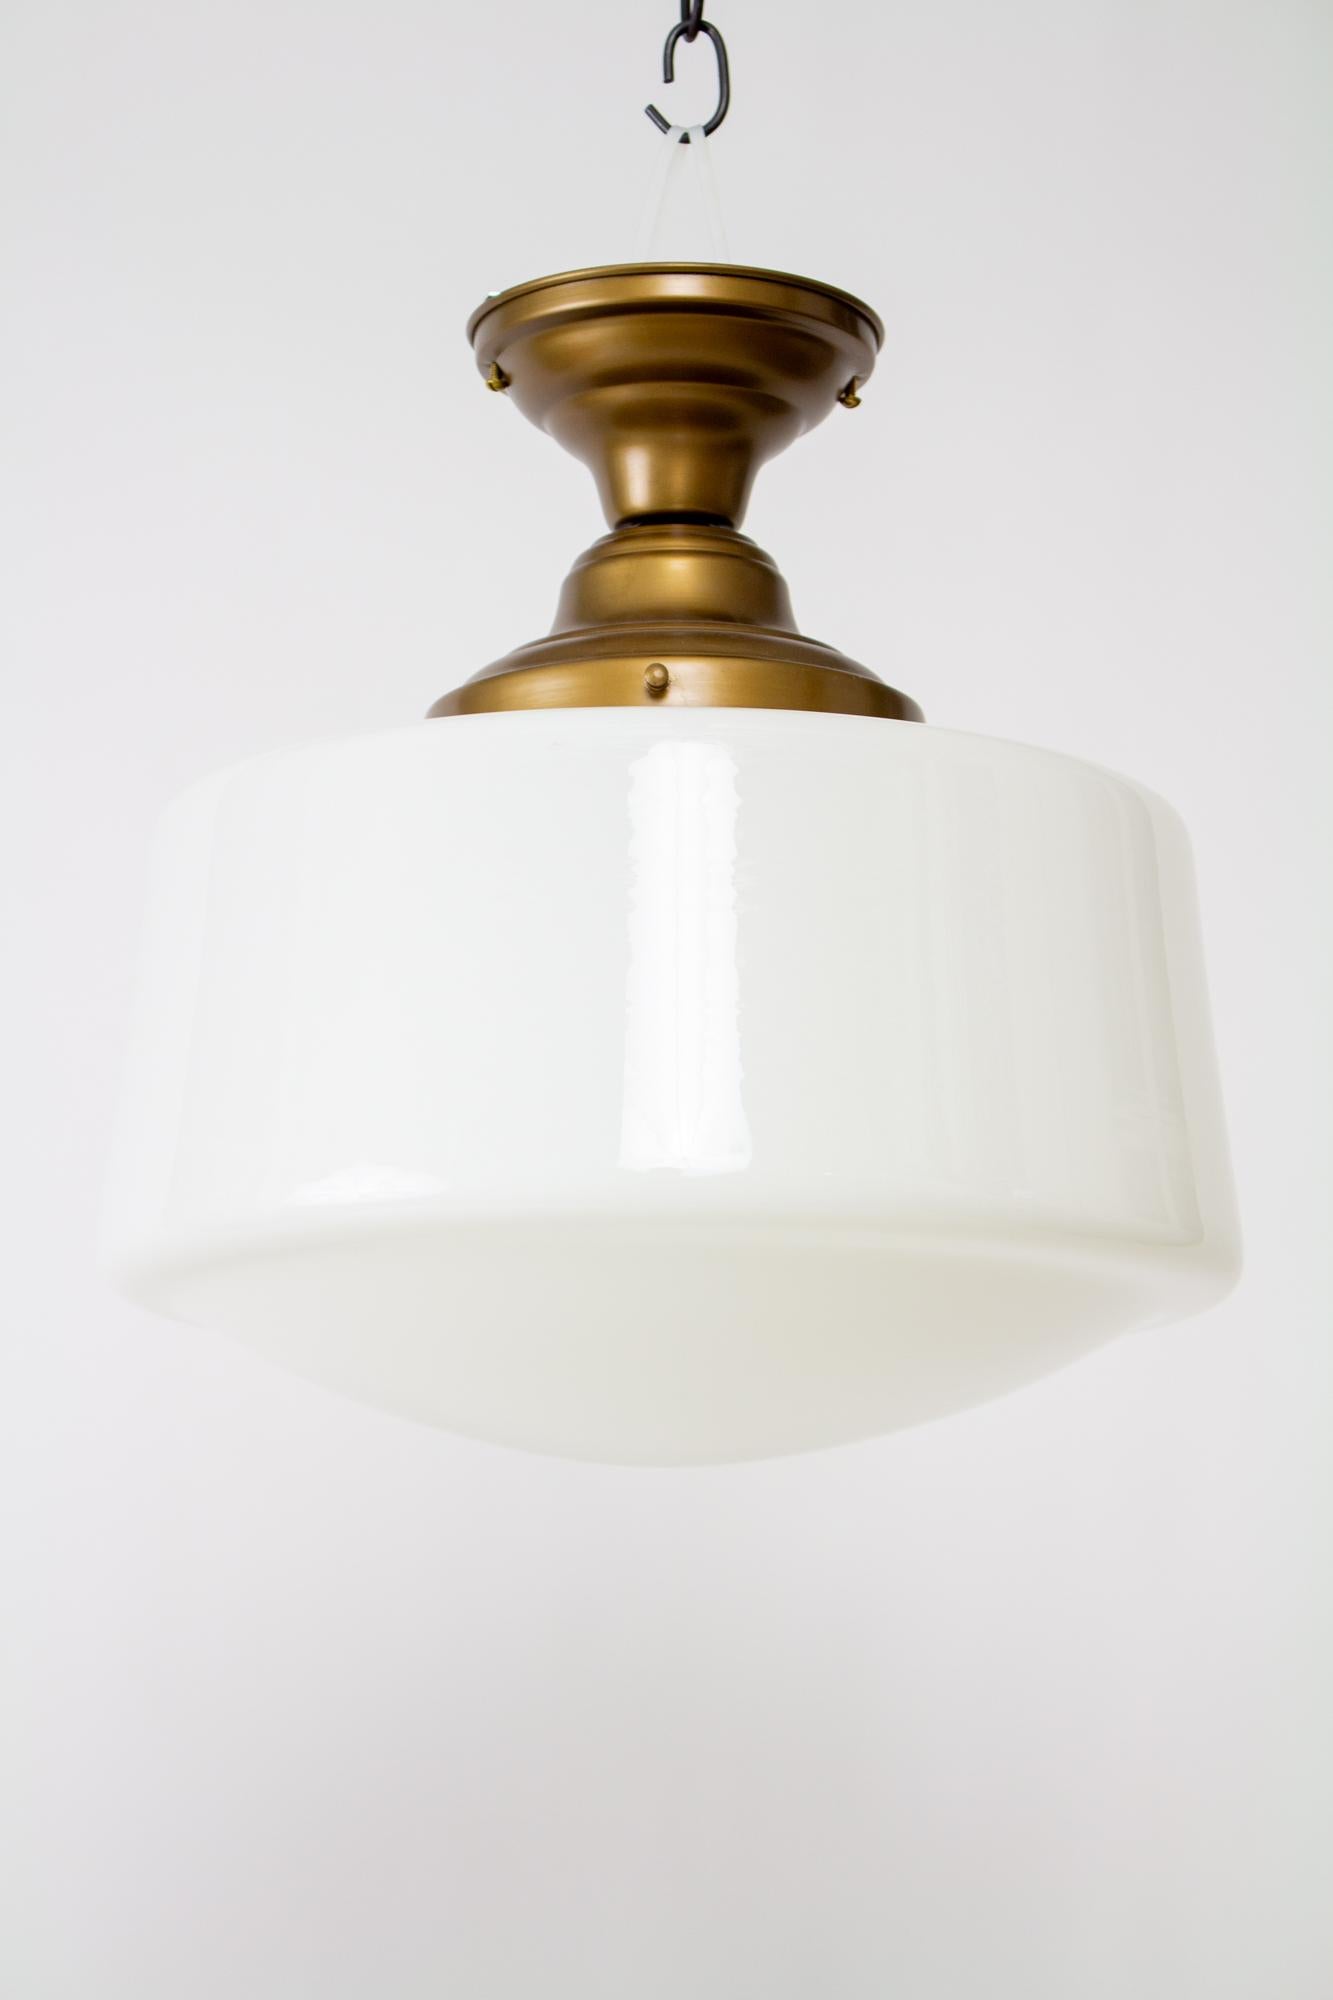 1930’s schoolhouse milk glass flush mount fixture. Glass is a variation of the traditional schoolhouse shade style. Mounted on a new fixture, satin antique brass finish , UL listed, with porcelain sockets. Excellent for a hallway or ceiling, and